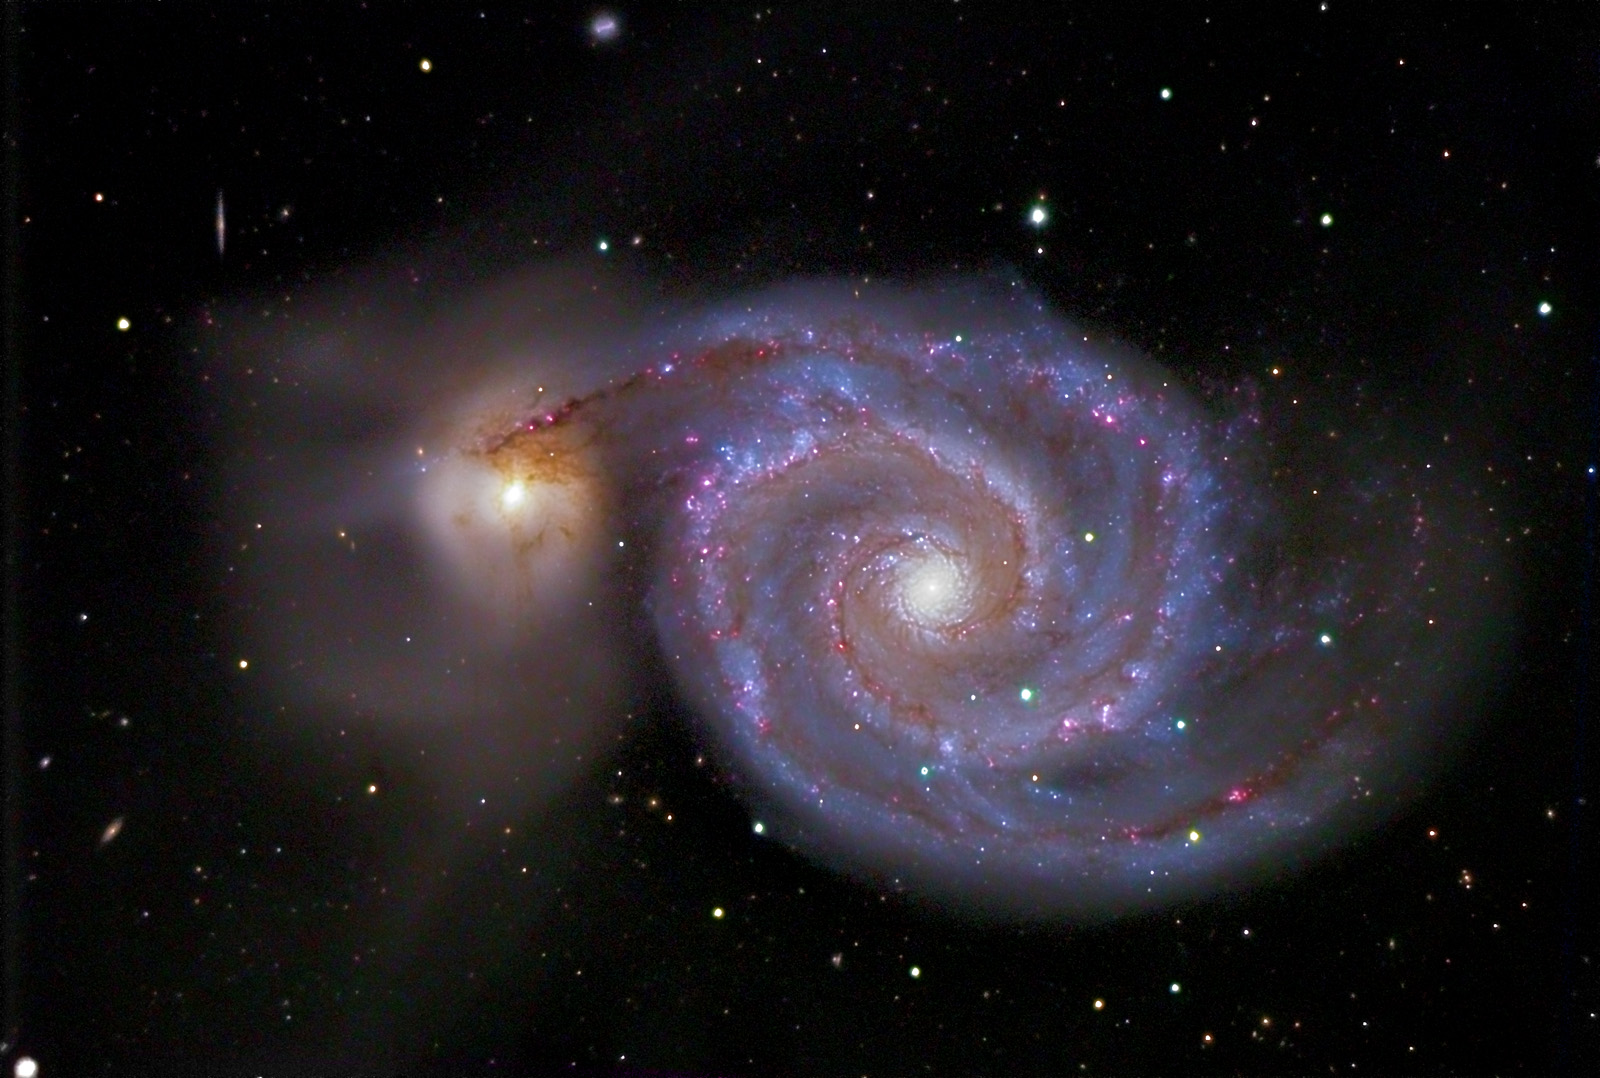 Photo Credit: Kent Biggs (The Great Whirlpool Galaxy http://www.kentbiggs.com/images/galaxies/M51.htm )